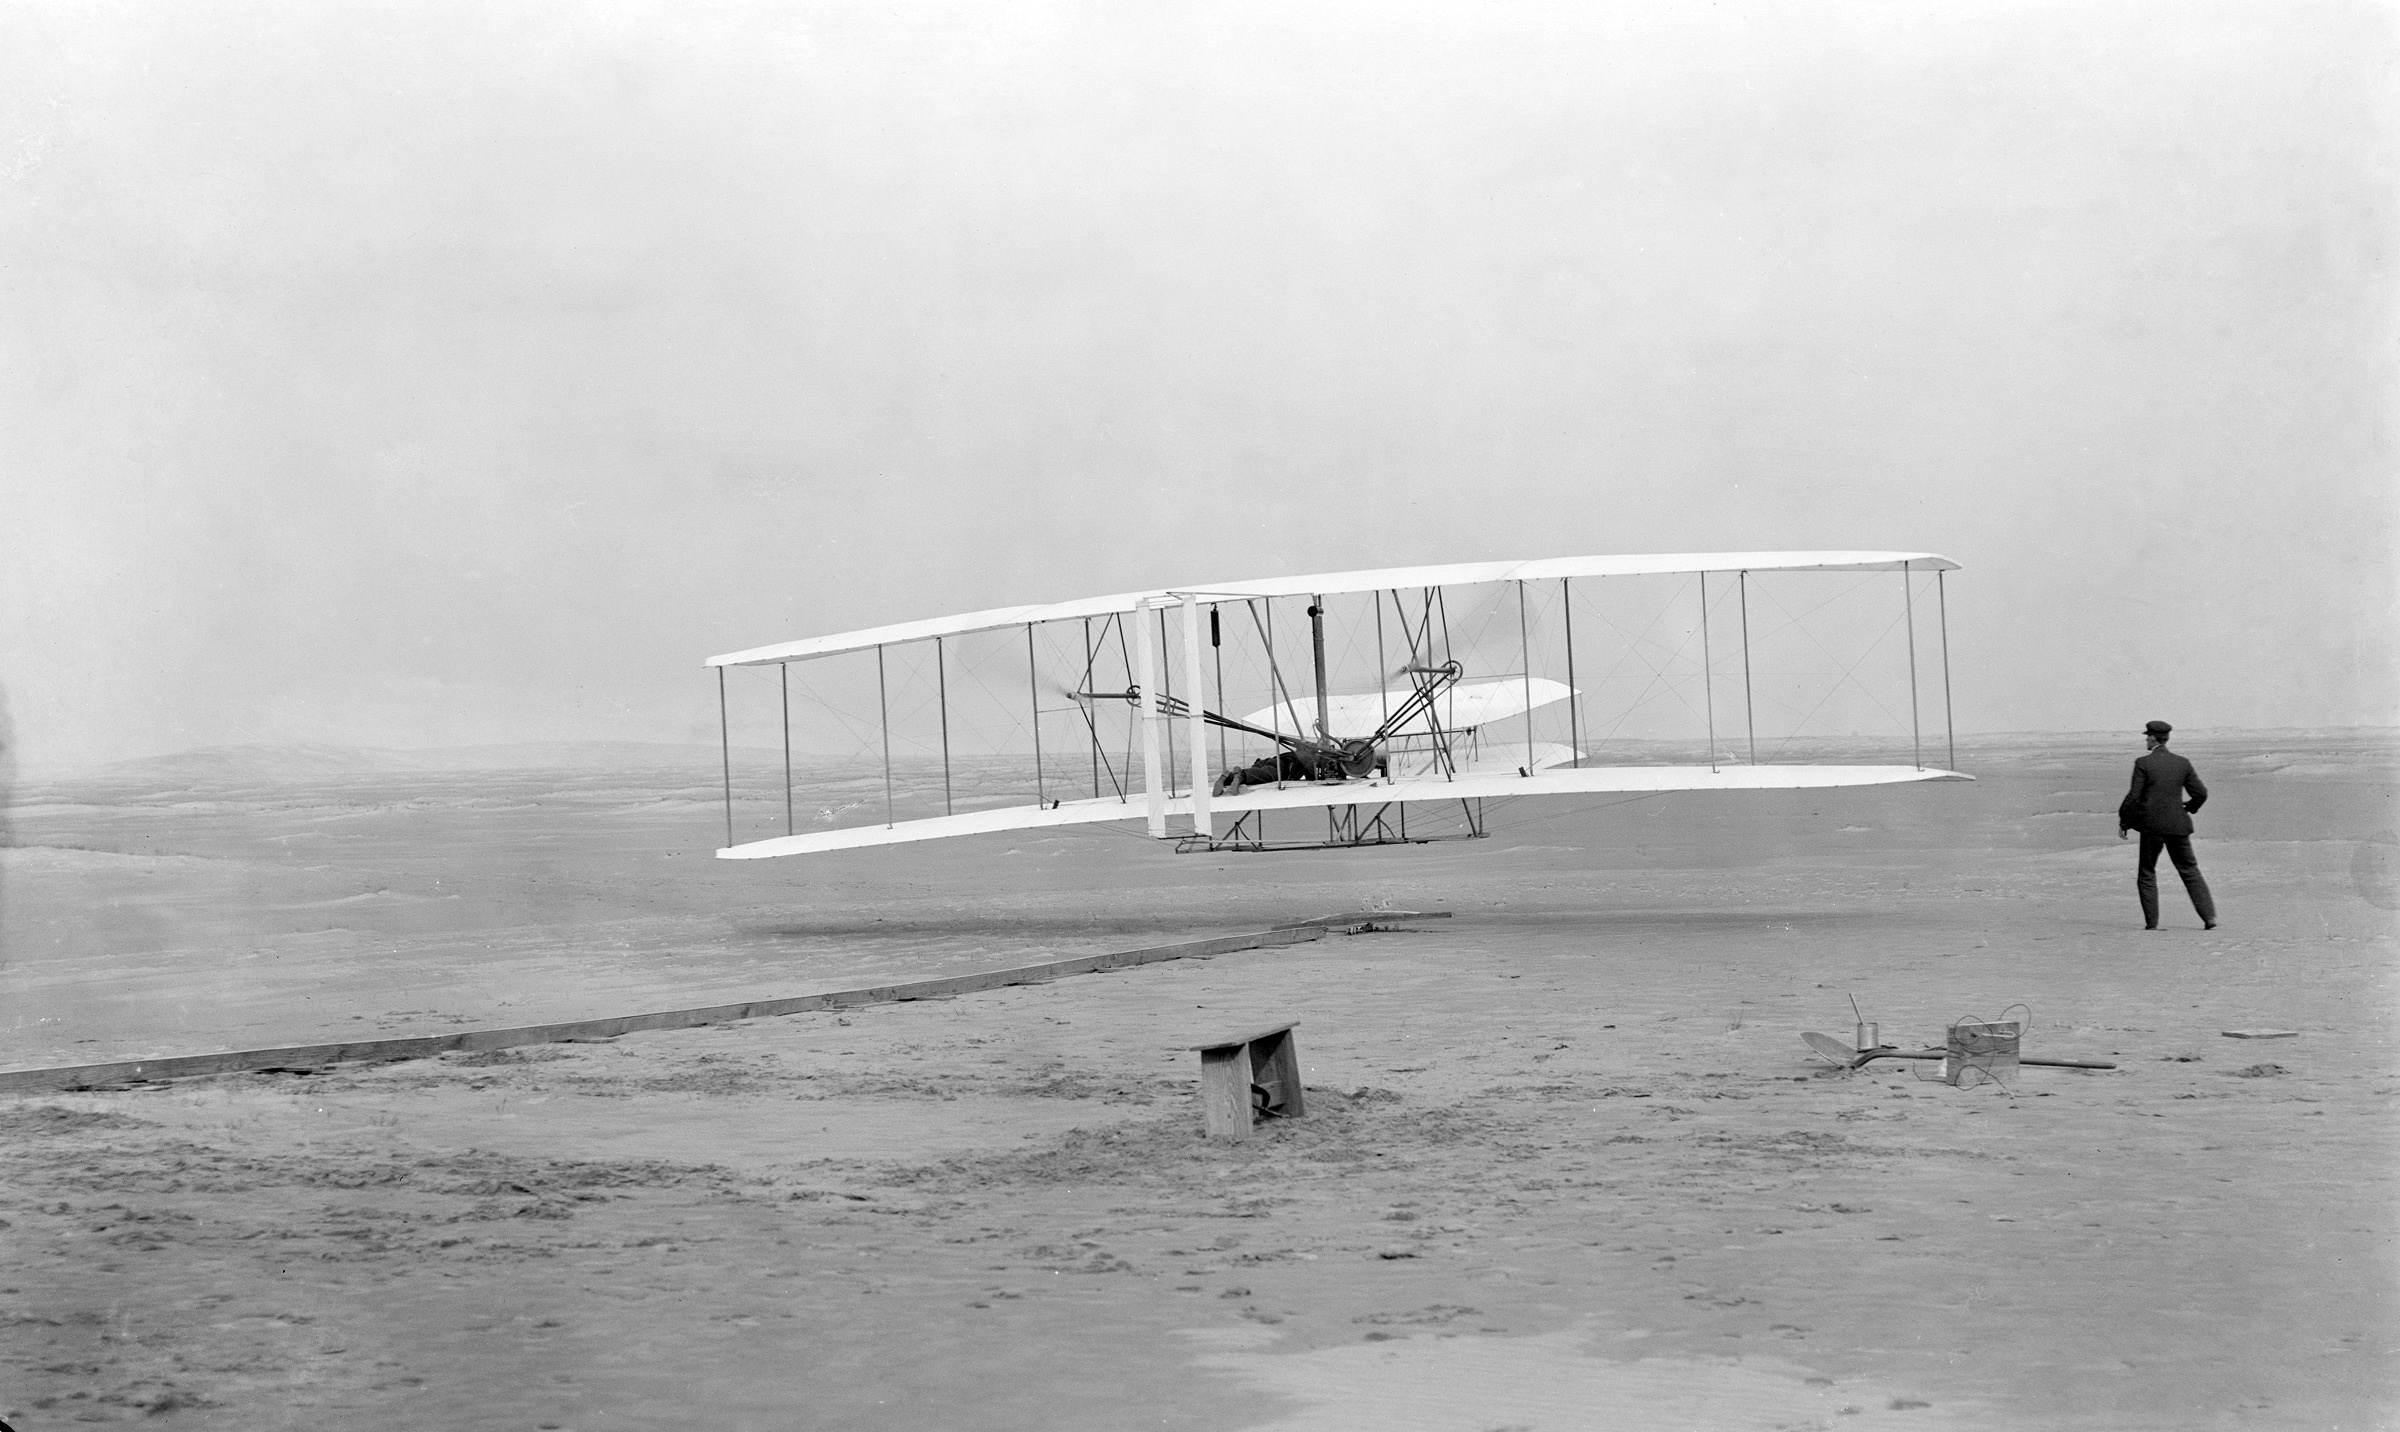 [2400 x 1432 photo (72 dpi) of Orville Wright's famous first airplane flight, 1903]